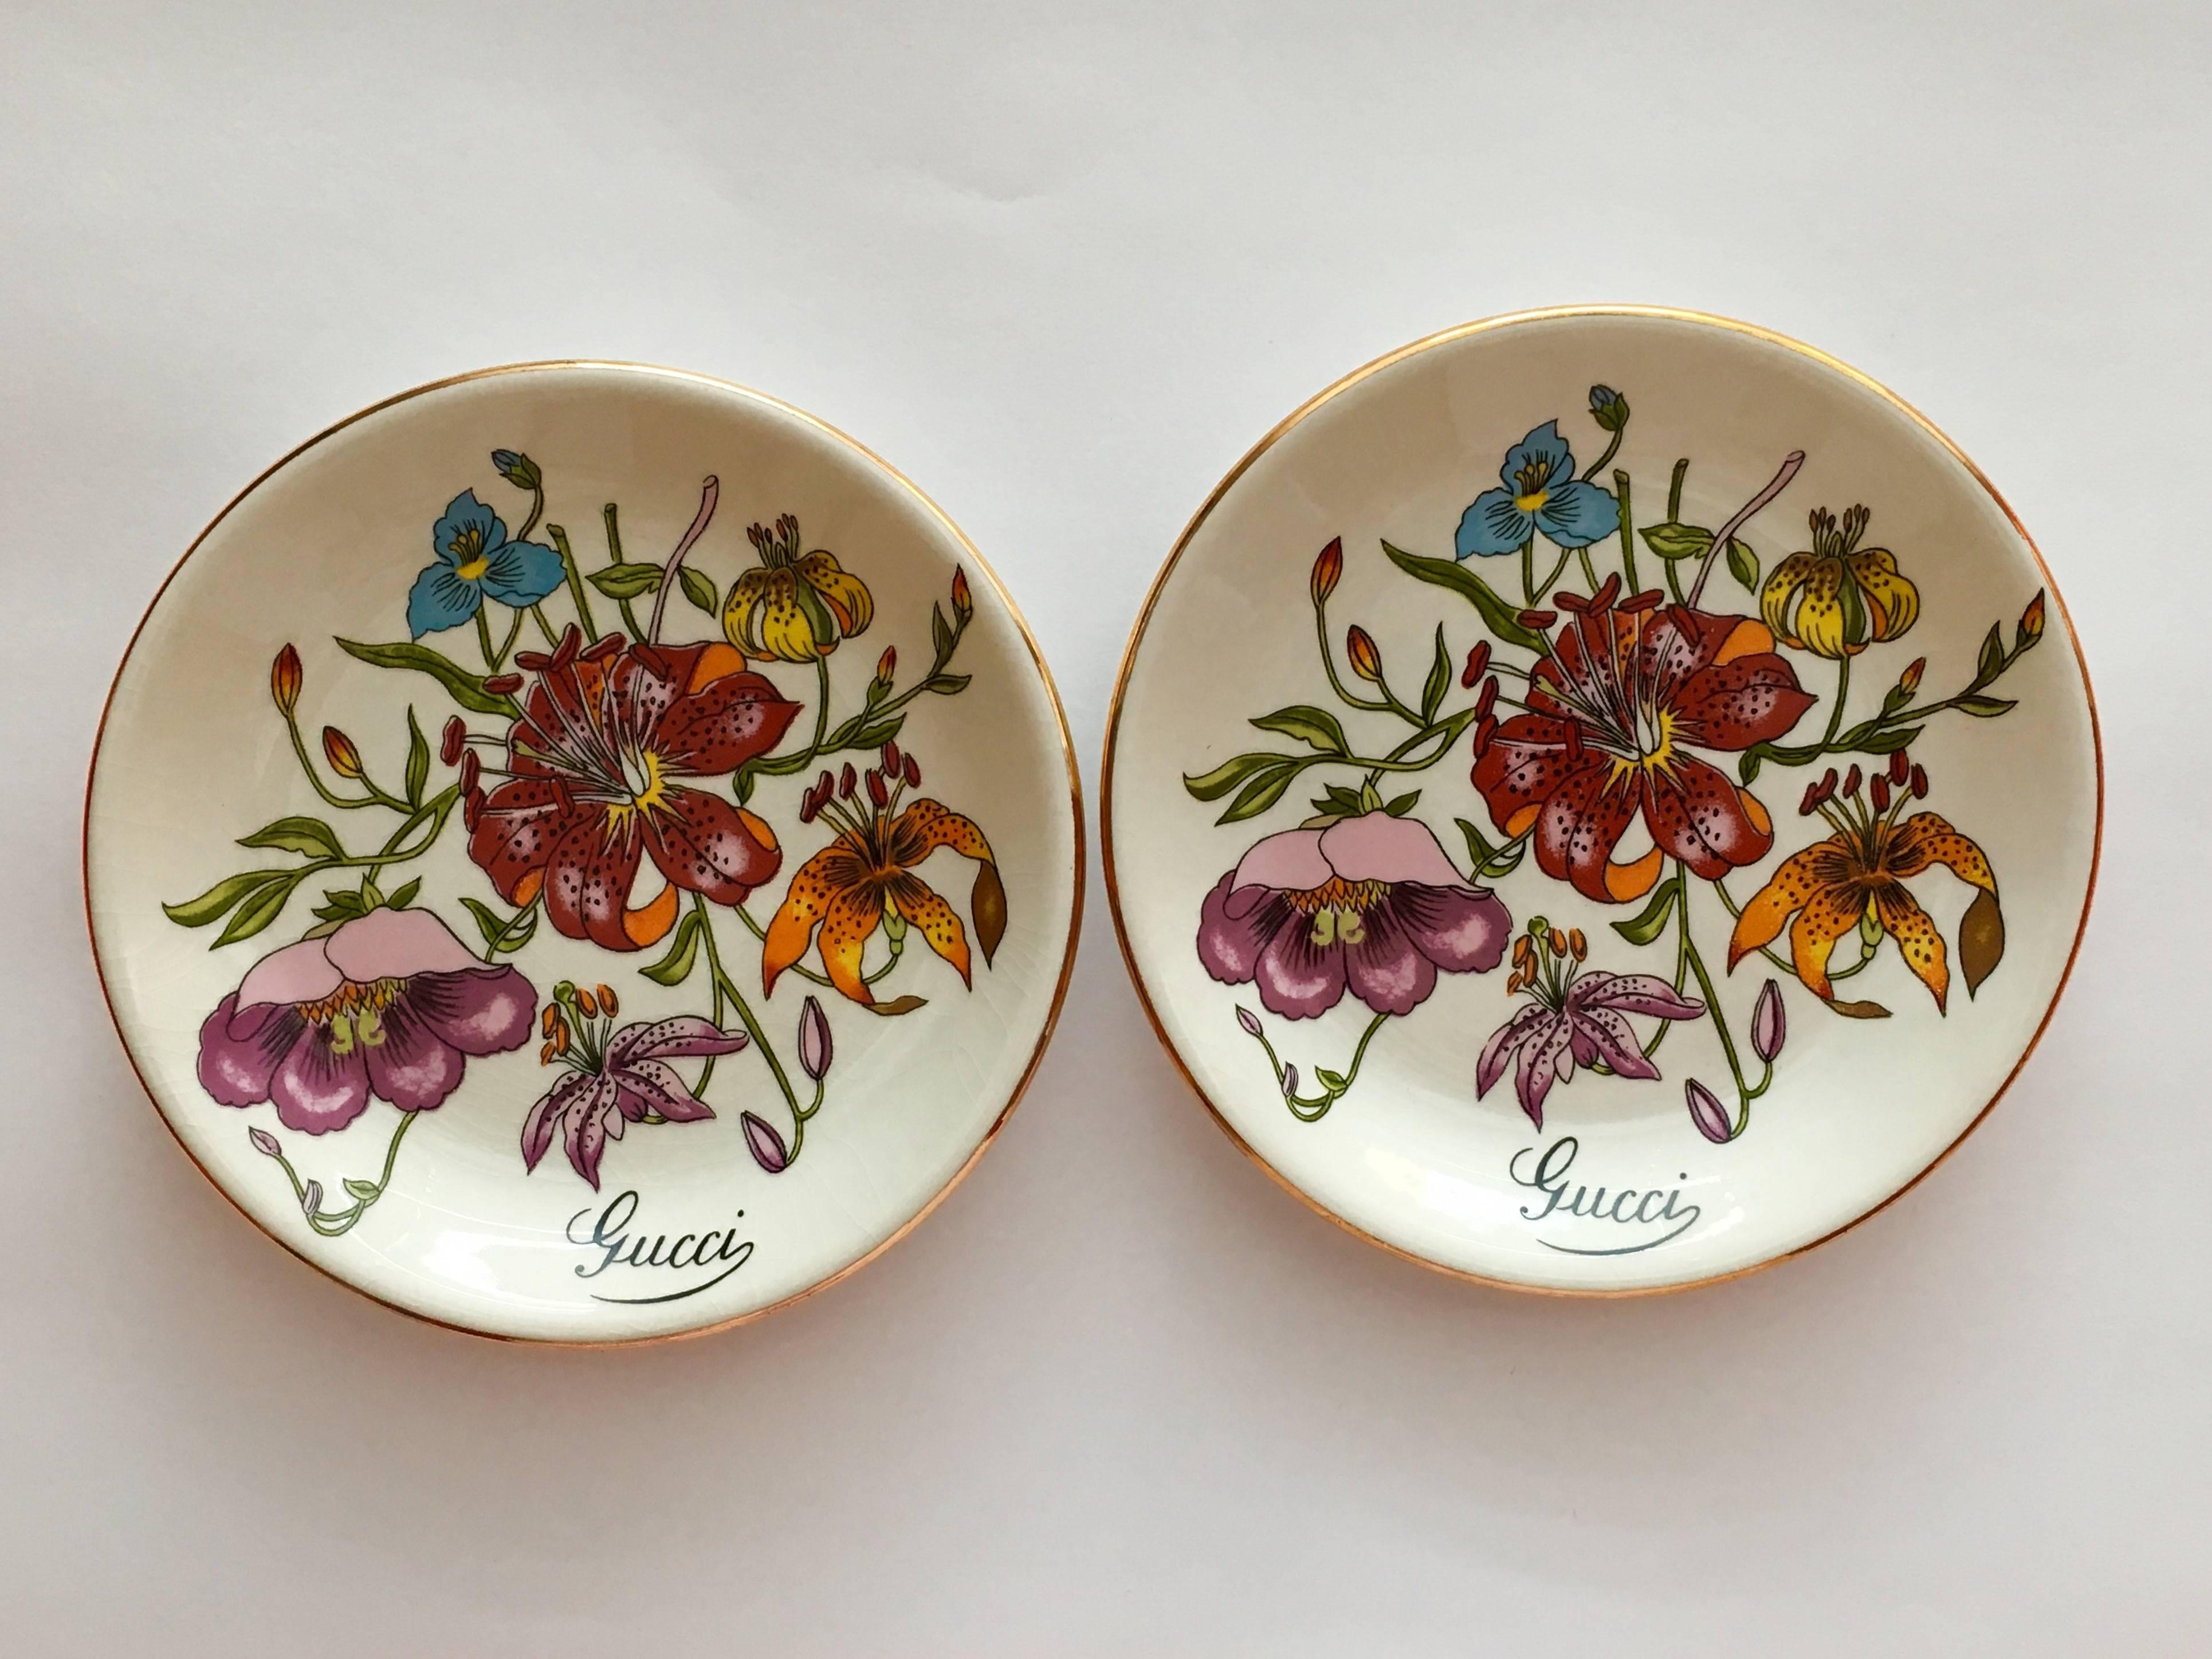 Vintage Gucci floral trinket or jewelry dishes. These dishes are decorated with multi-colored flowers and signed 'Gucci' on the front and 'Gucci Florence Made in England' in gold lettering on the backs. They are painted with gold around each rim and